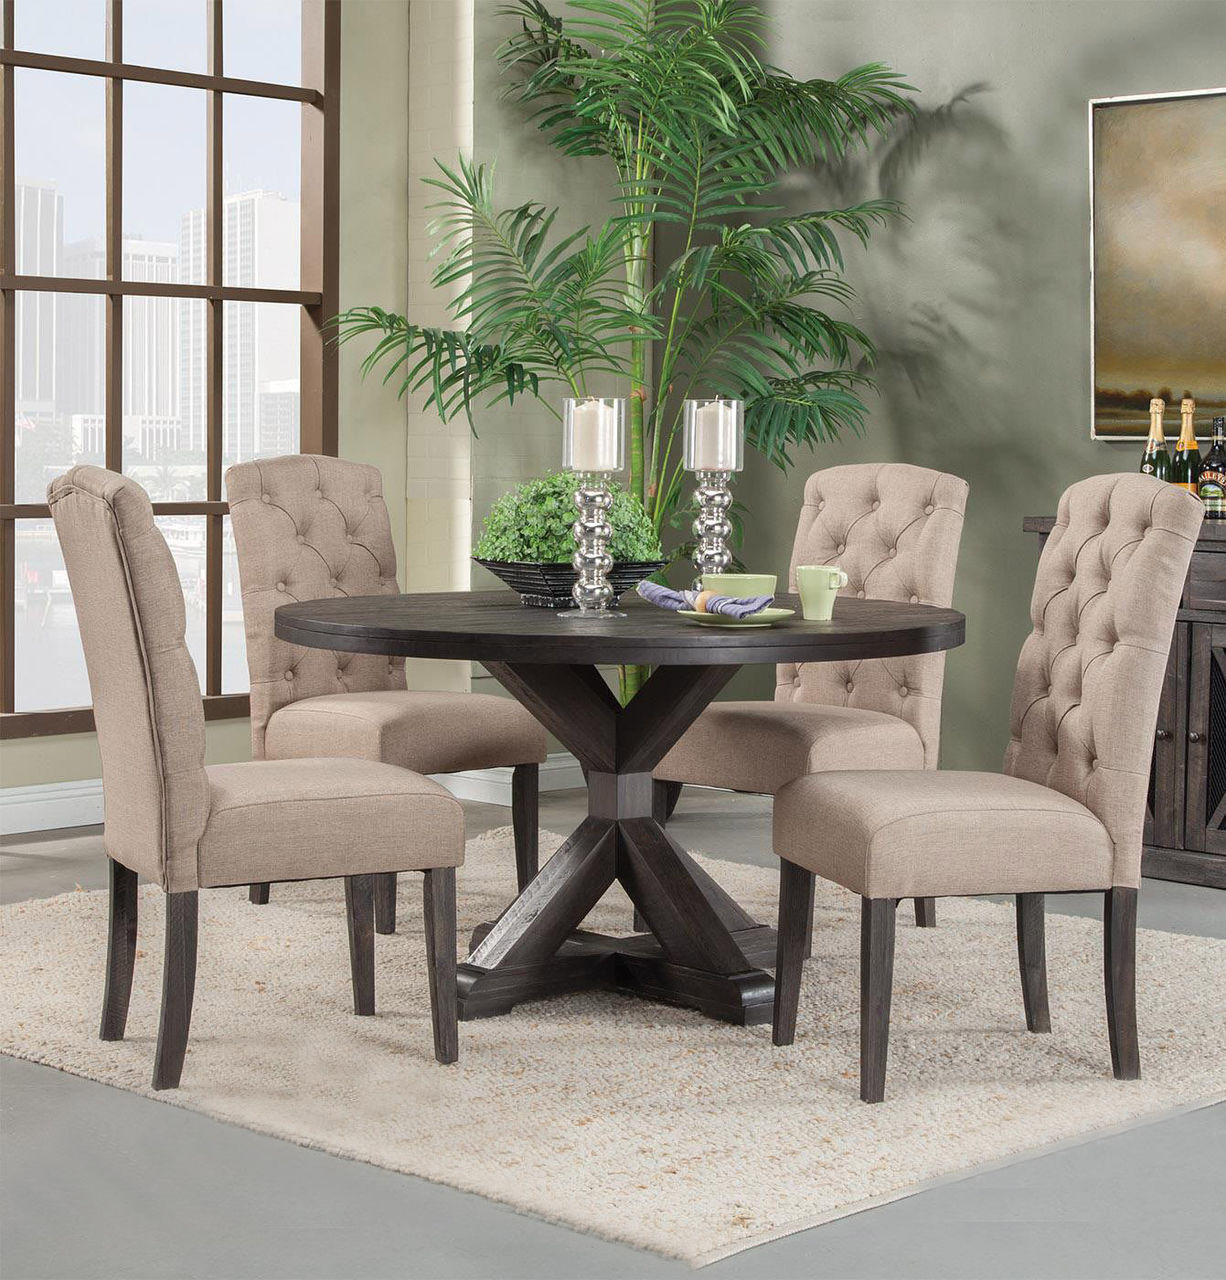 Fall Trend Rustic Dining Table And Chair Sets Www Efurniturehouse Com